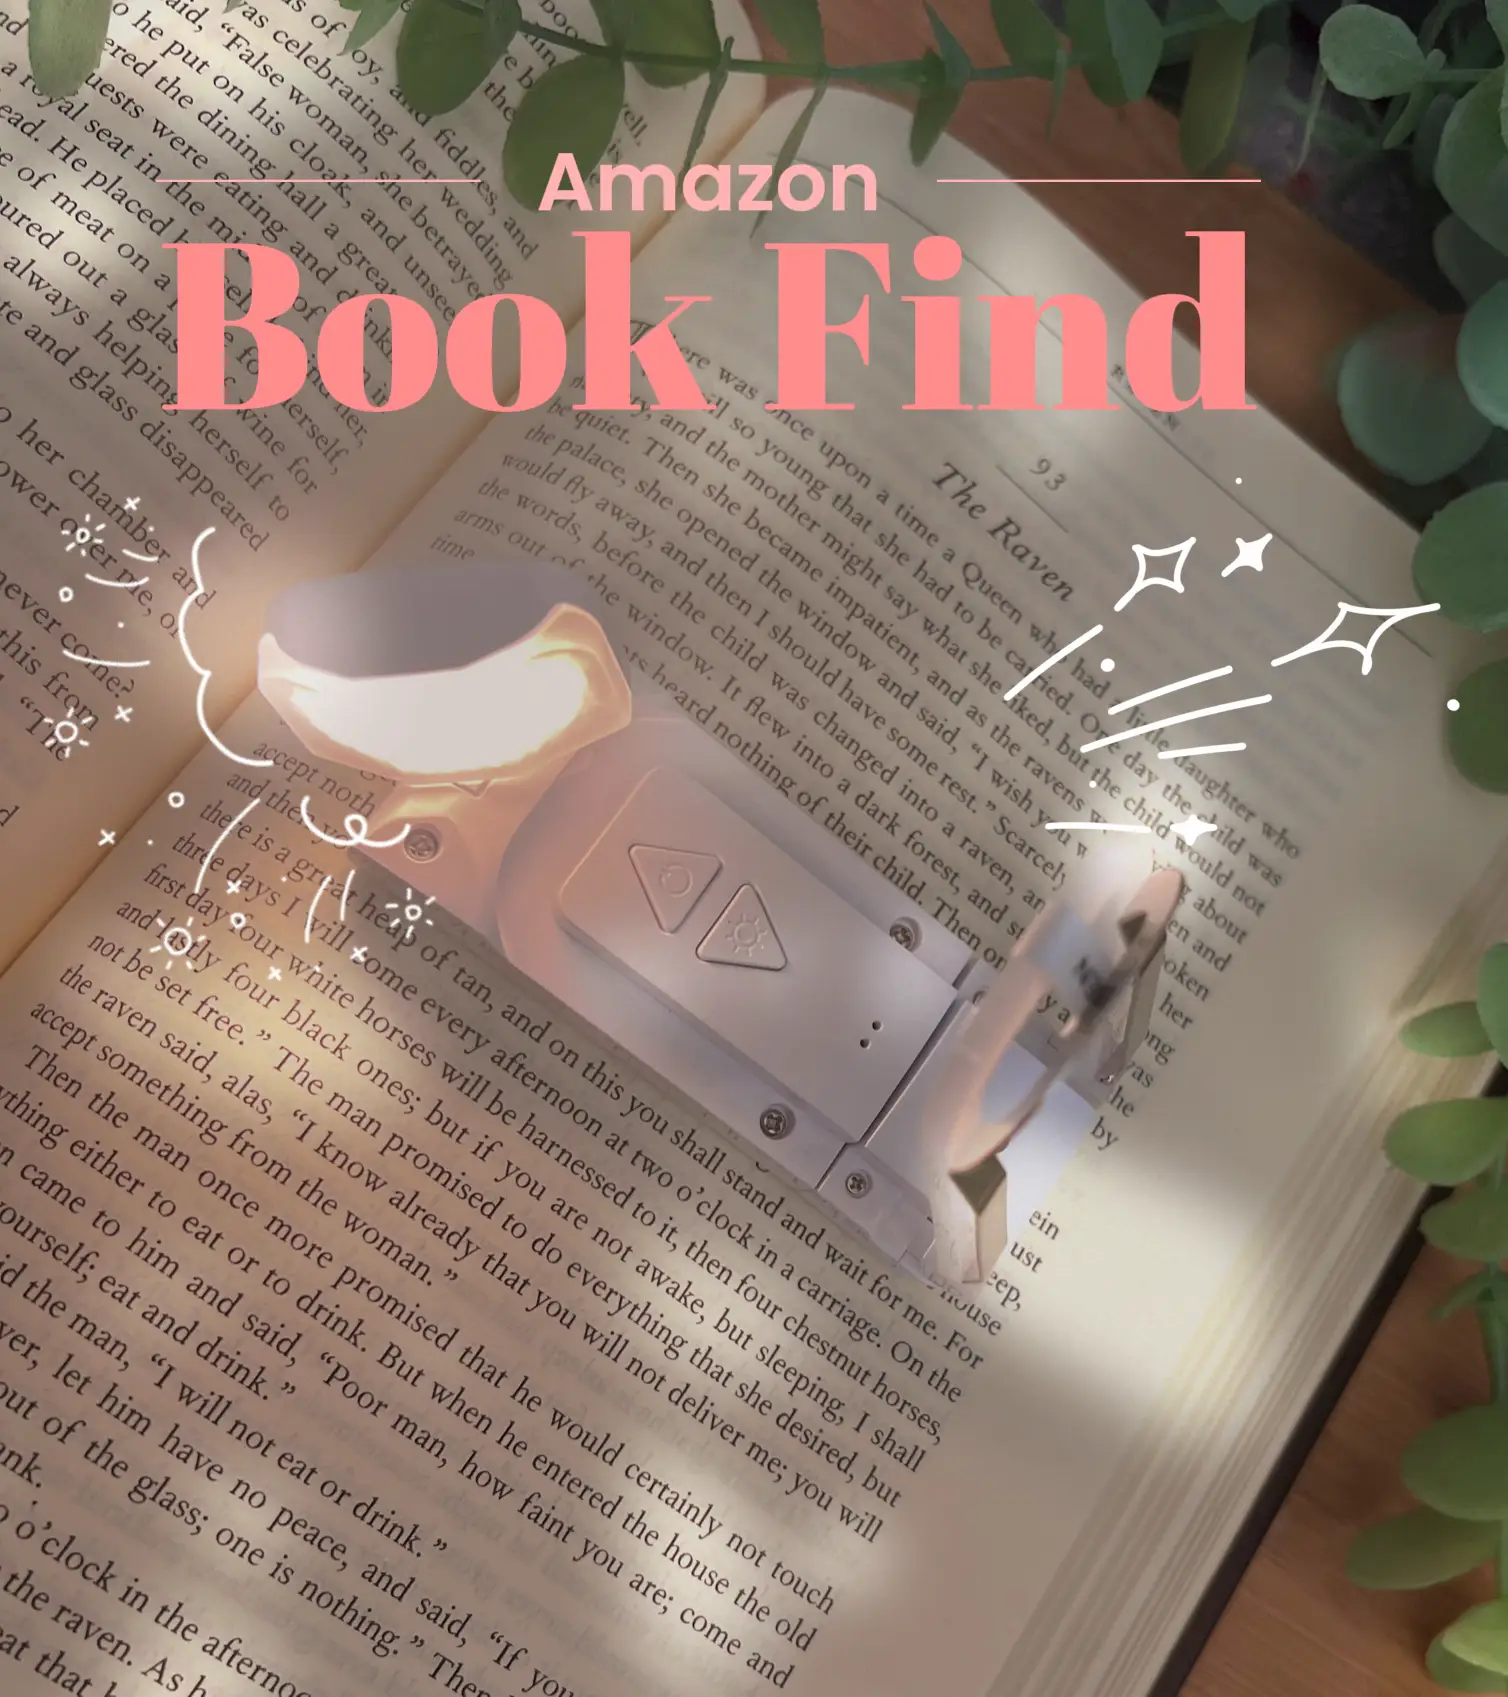 USB Led Lamp book reader - FREETIME Torches - Torches and lanterns